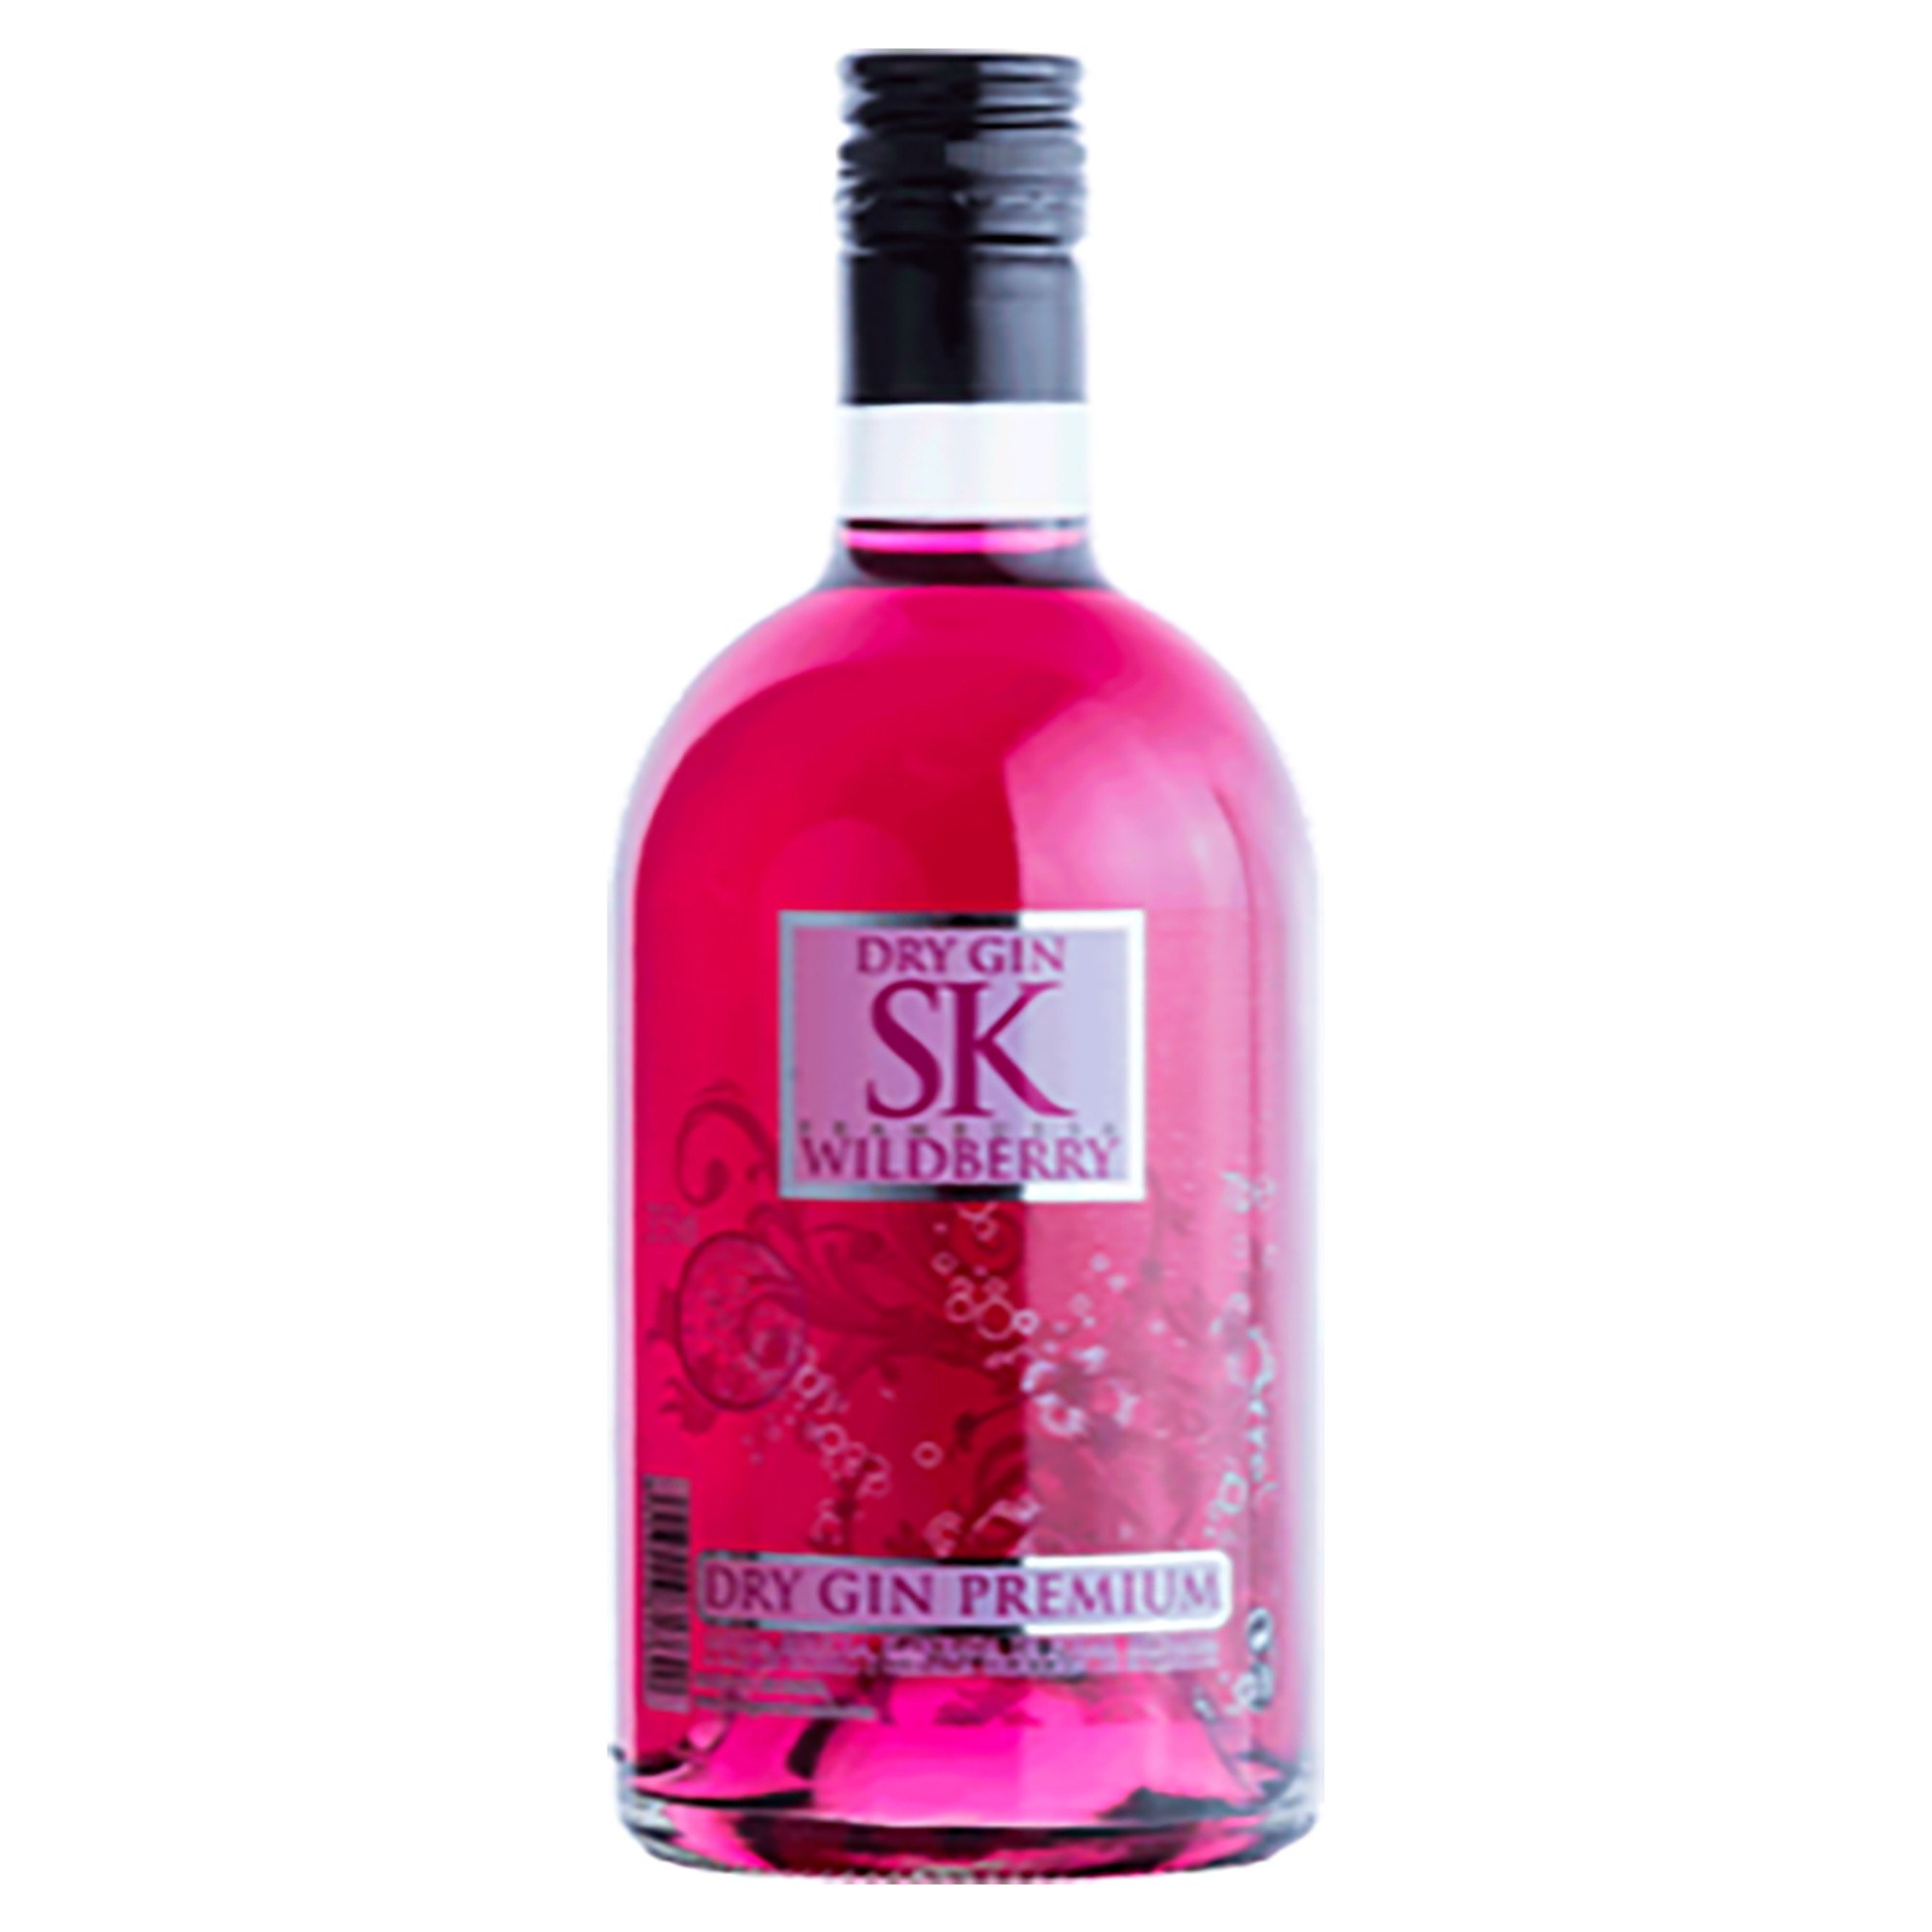 SK Wildberry Dry Gin - 70 cl